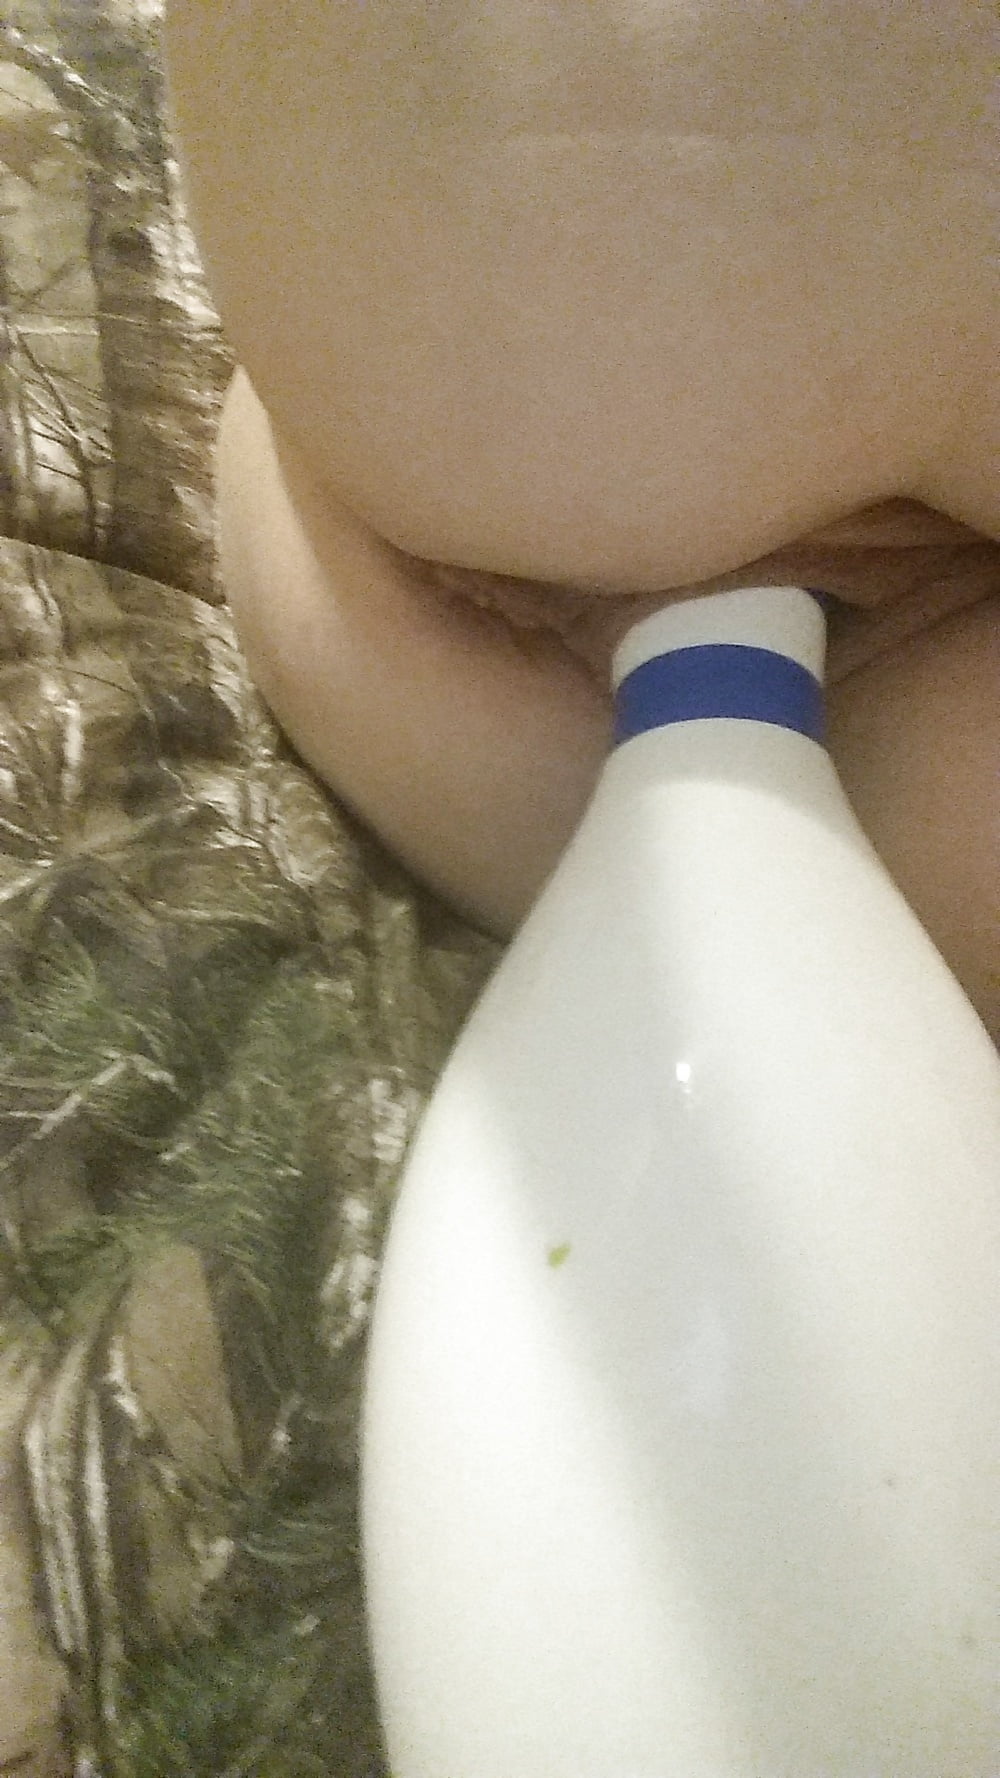 Bowling Pin In My Pussy 8 Pics